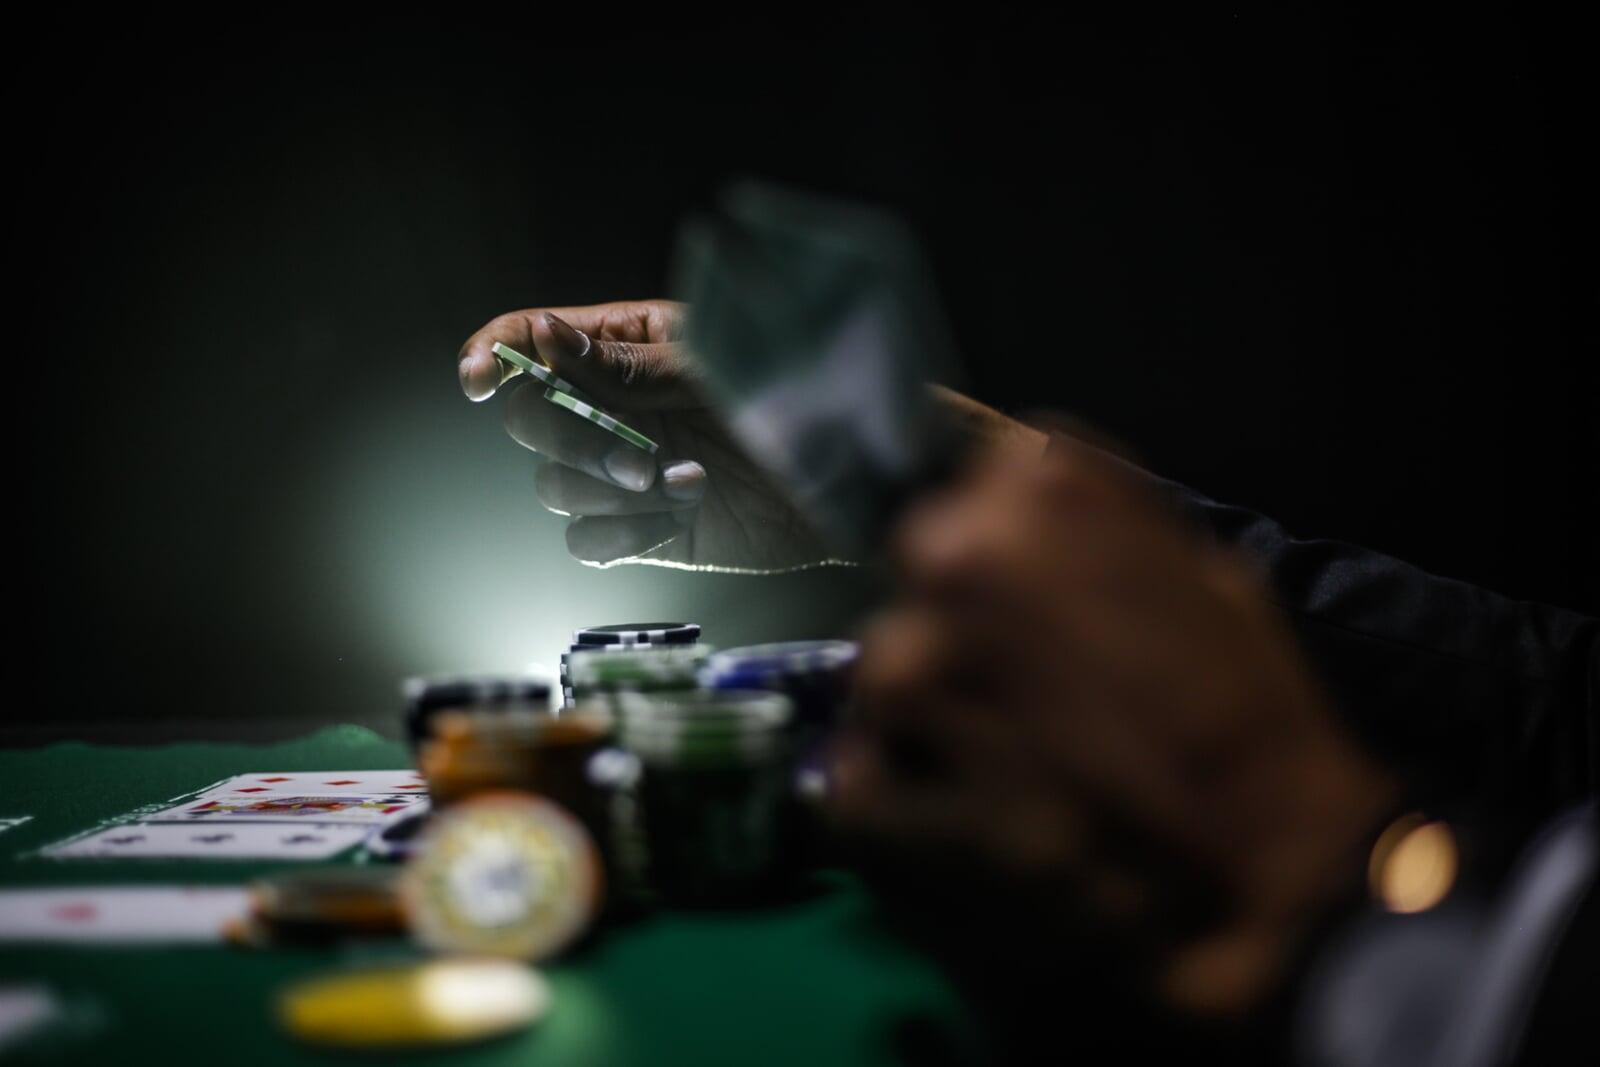 Assiduous, competent online poker player who lives on his earnings: consumer or professional?